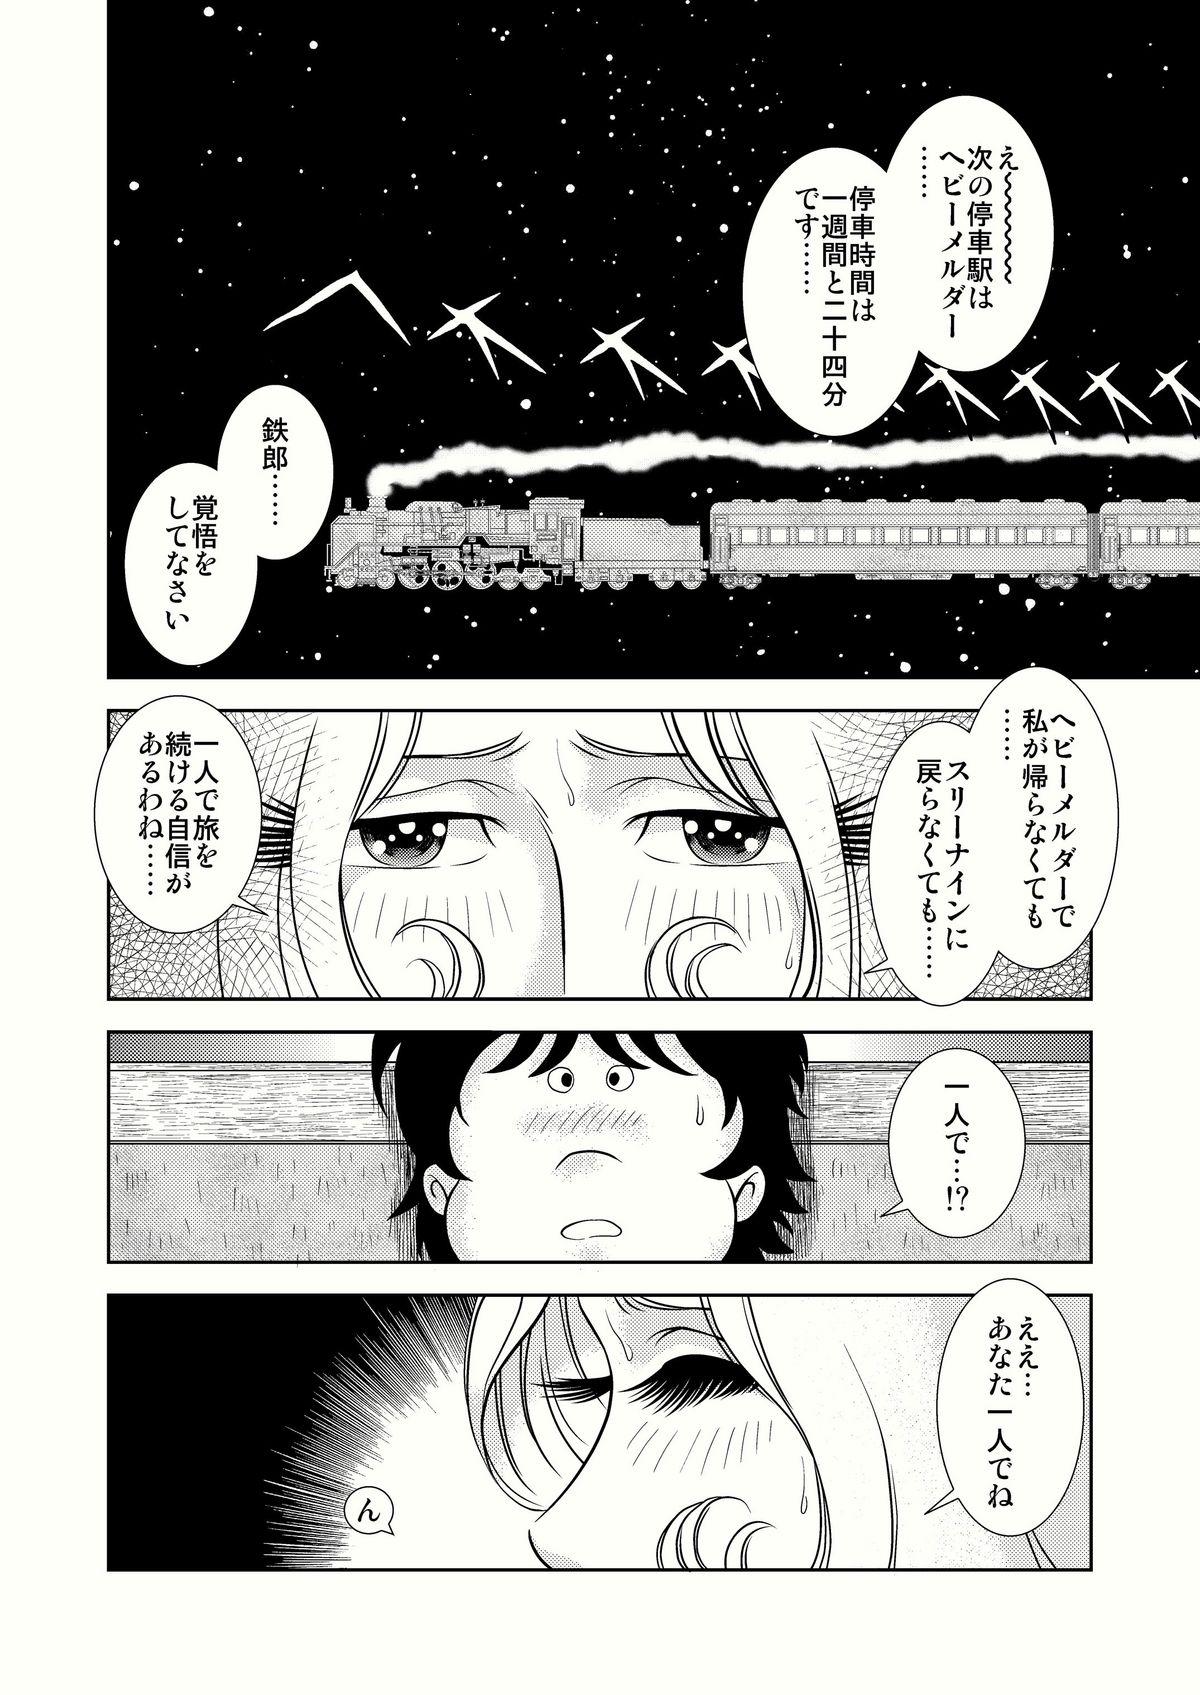 Amateur Teen Maetel Story 4 - Galaxy express 999 Teenfuns - Page 2